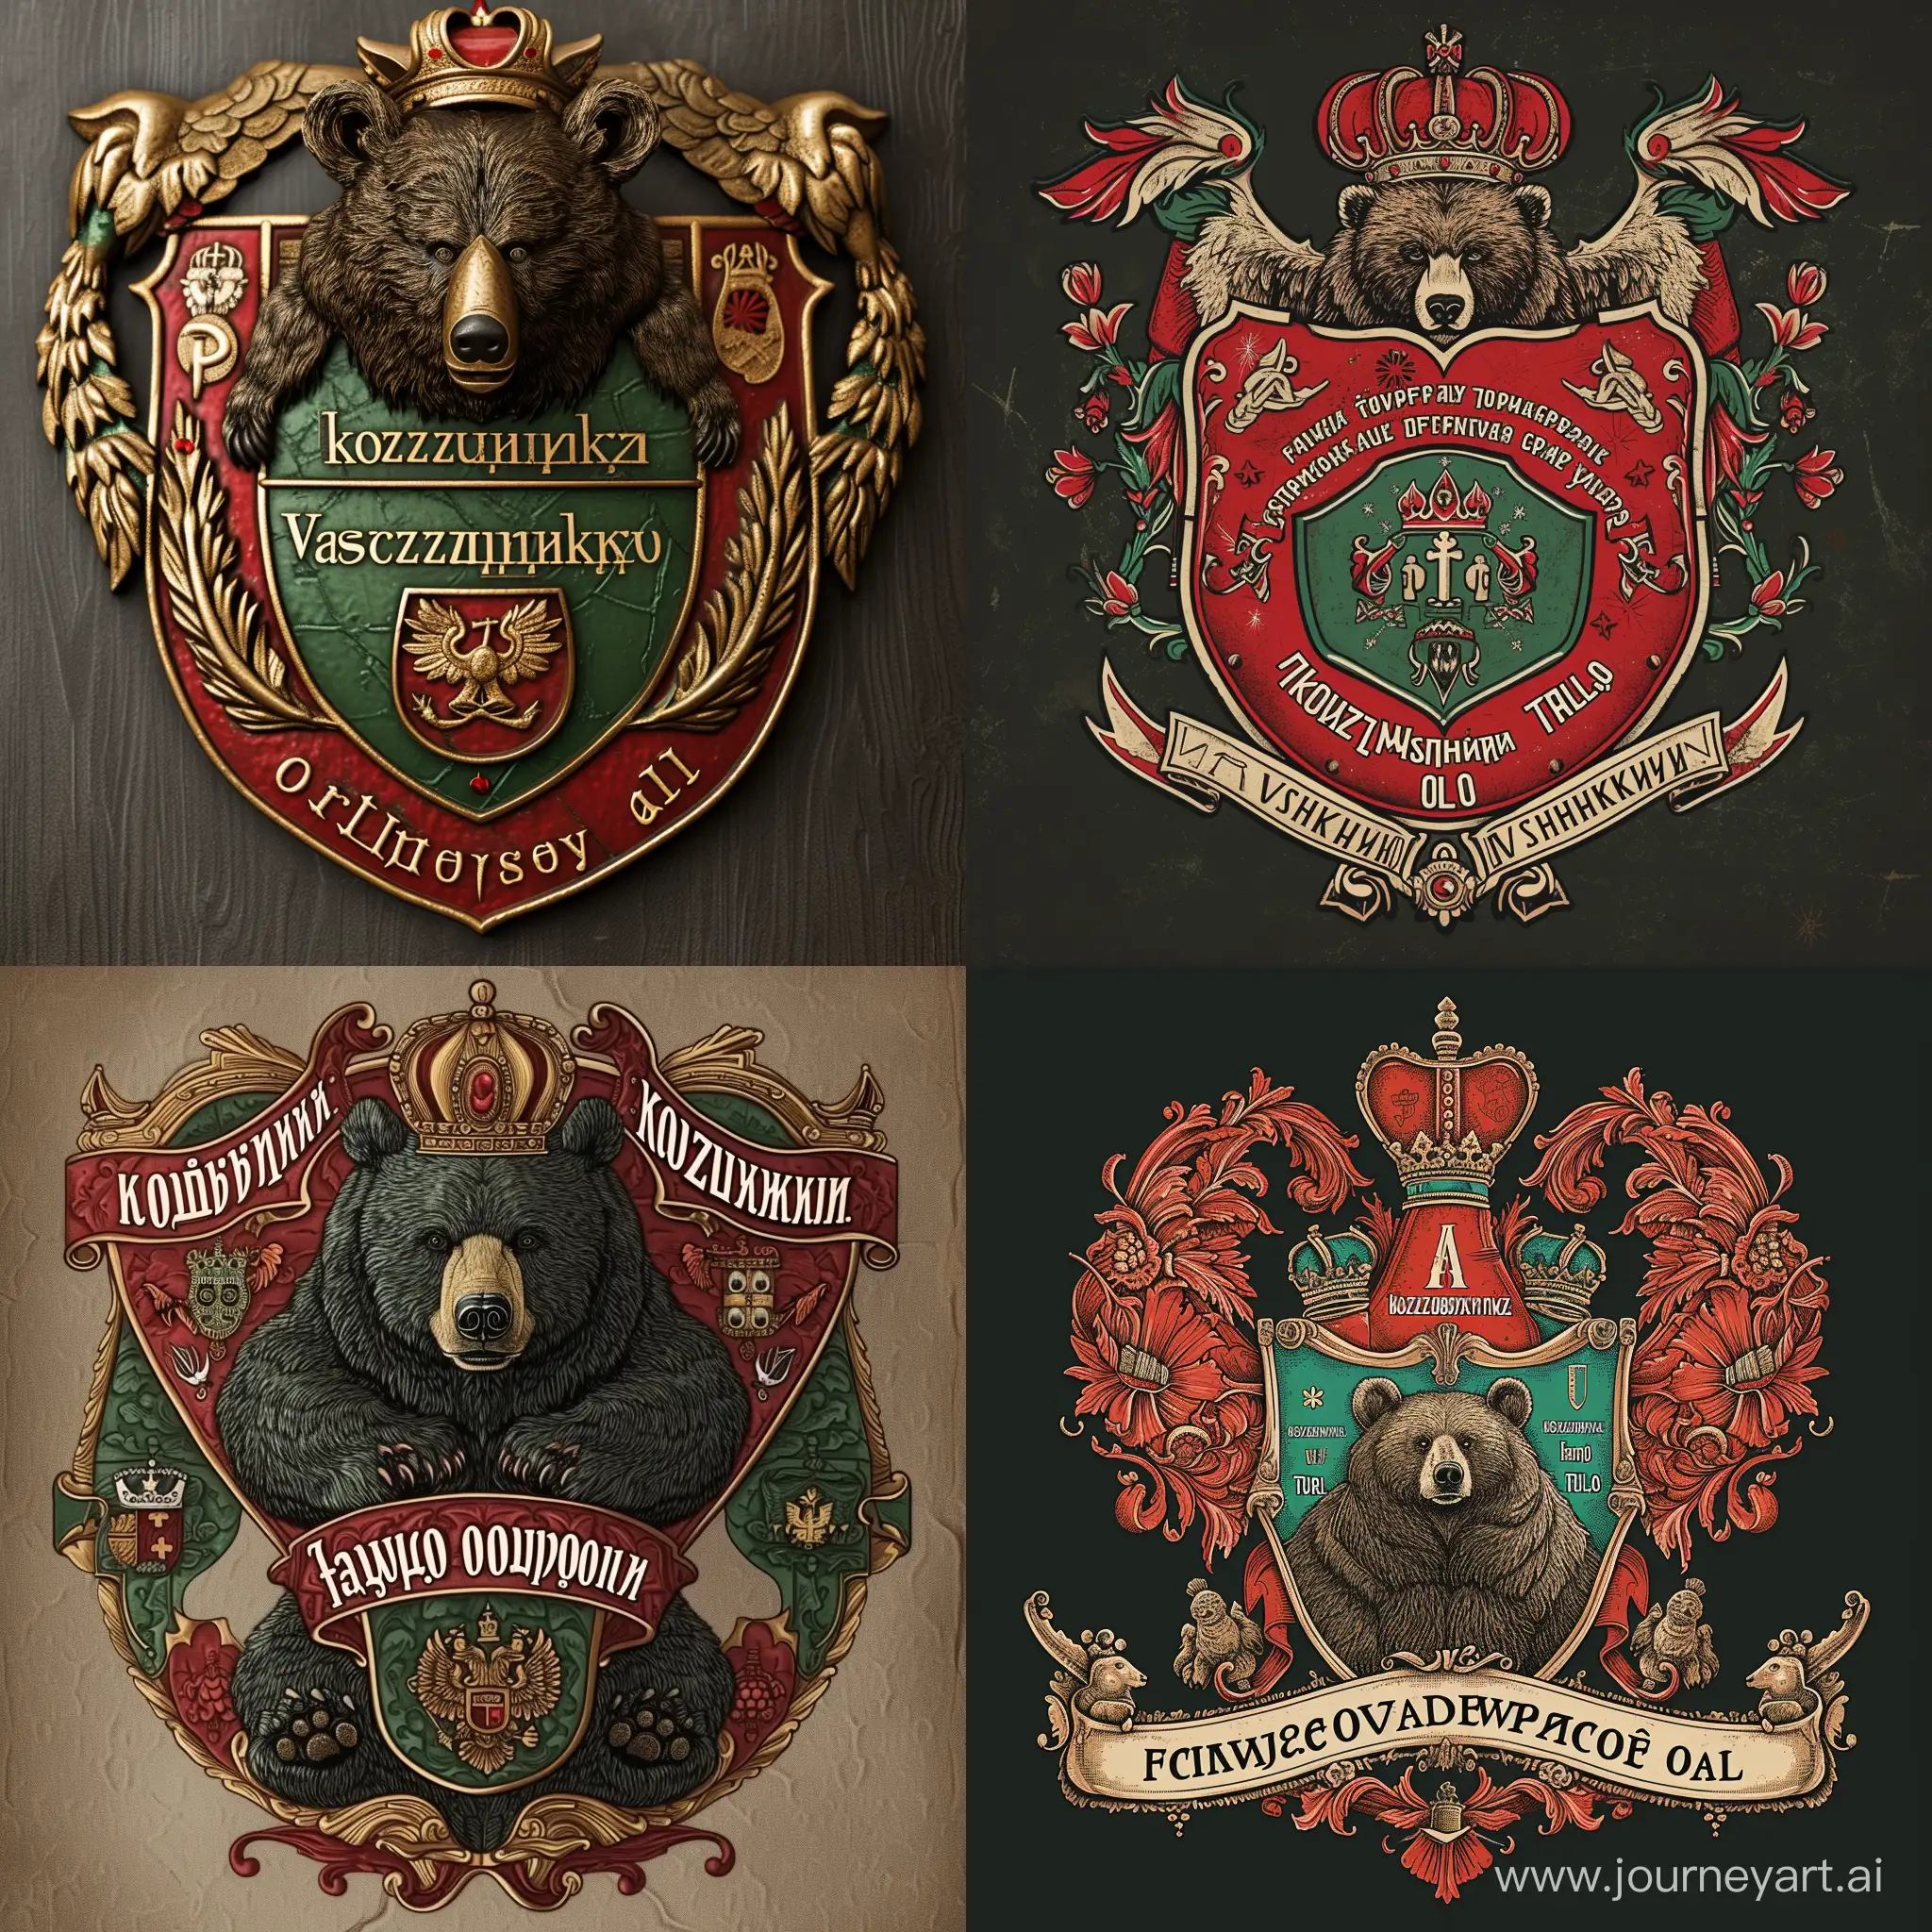 Family-Coat-of-Arms-Bear-Centerpiece-with-Heritage-and-Values